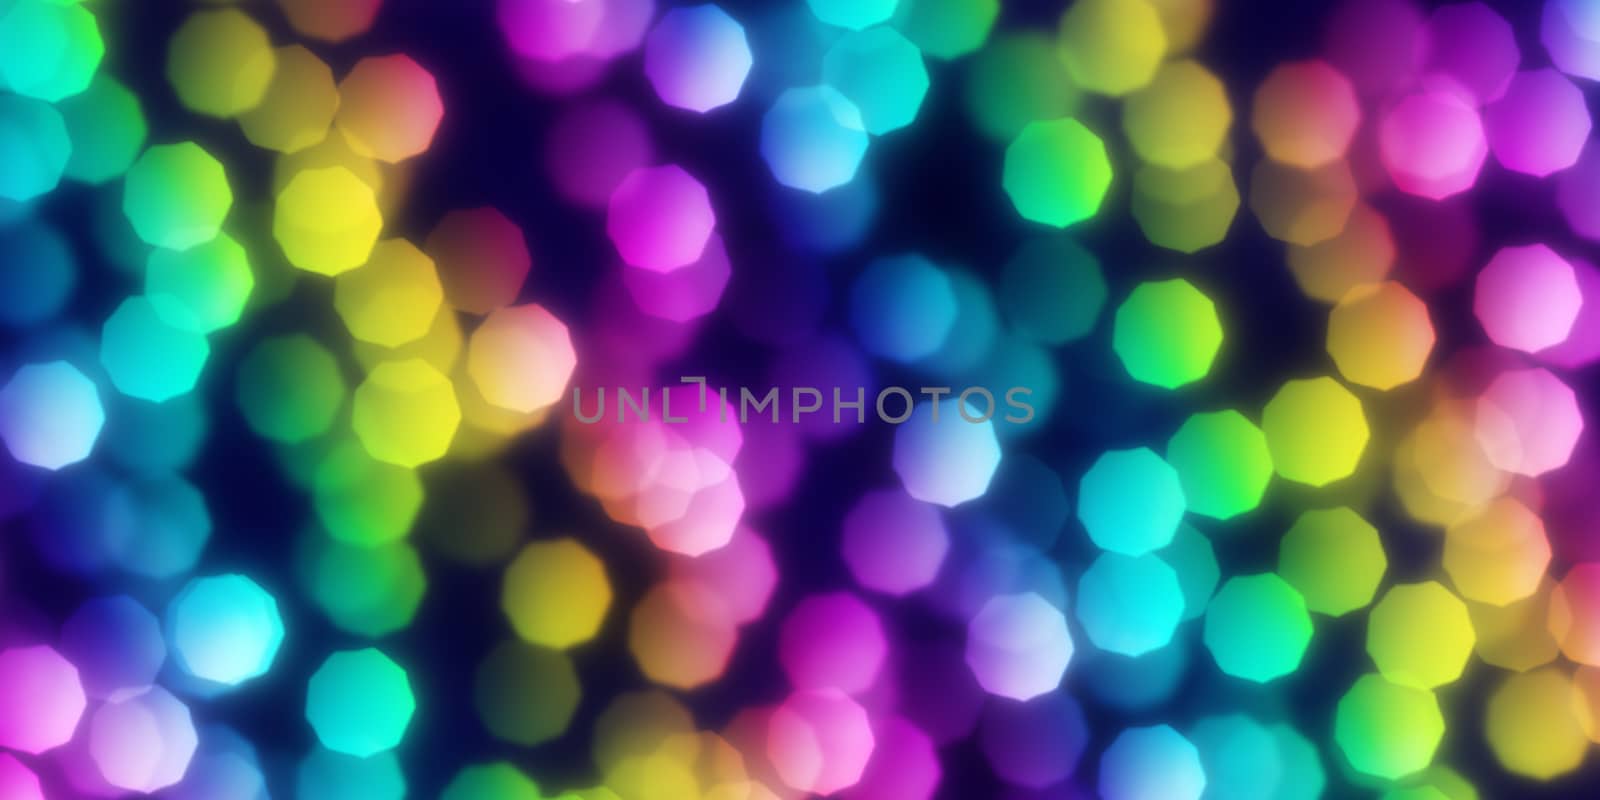 Rainbow Pentagon Shapes Bokeh Background. Abstract Figure Night Lights Texture. Abstract Glowing Forms Backdrop.